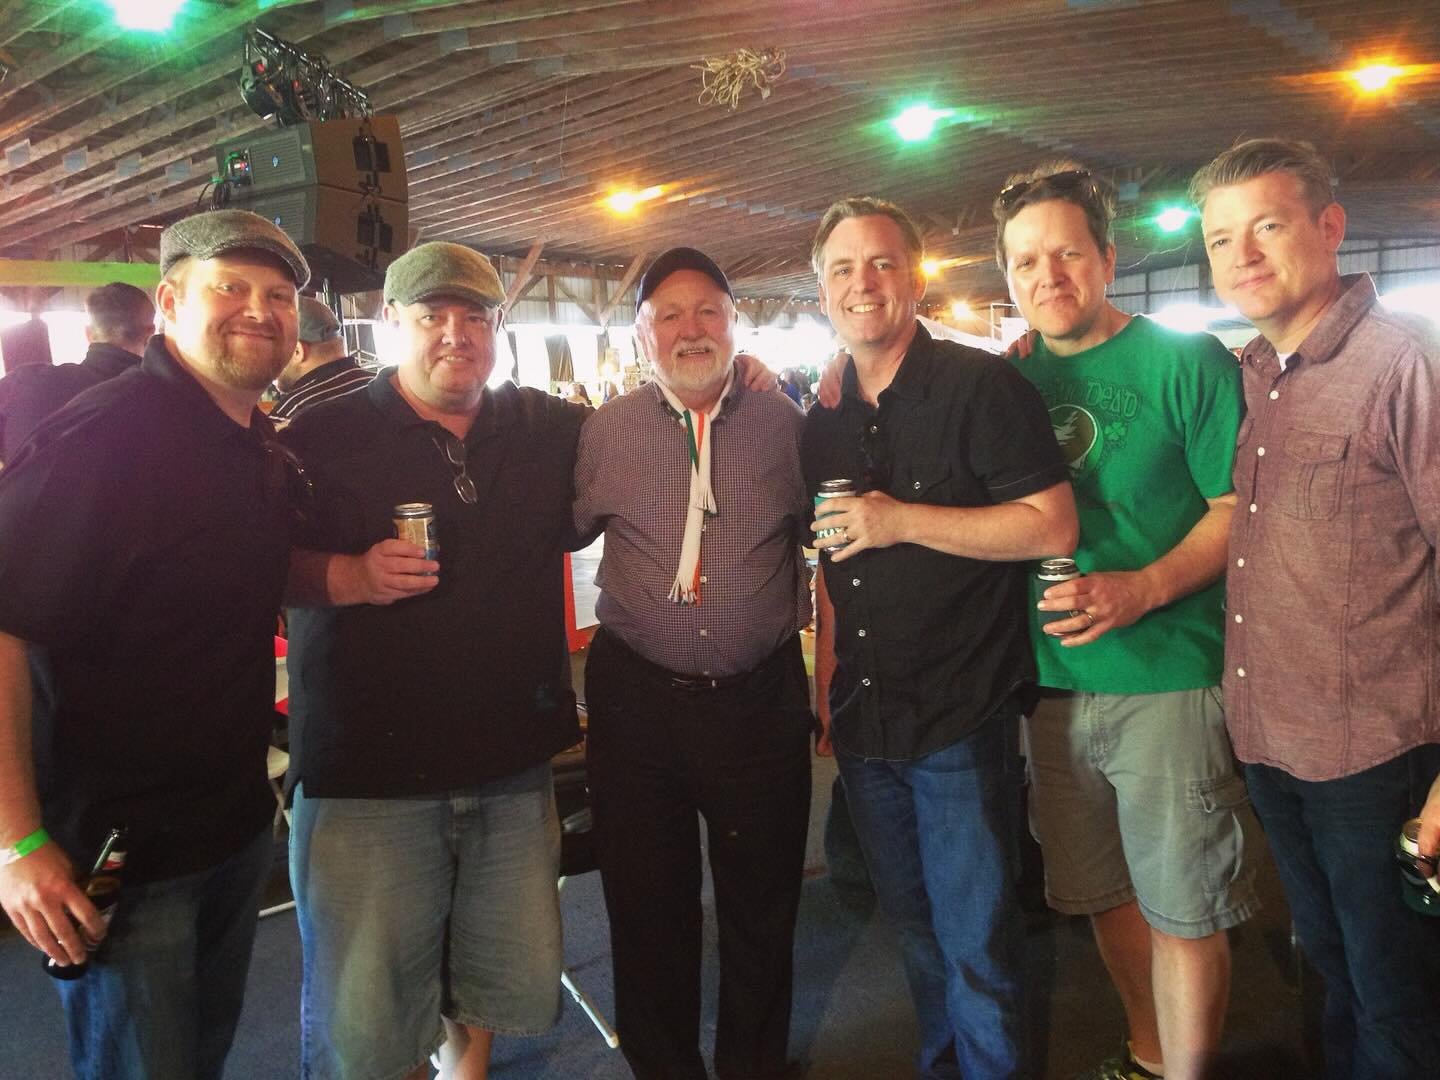 With less than a month to go before this years East Durham Irish Festival, here&rsquo;s a shot from eight years ago at the festival back stage with the legendary Derek Warfield. Make sure you purchase your tickets today!! #backstage #hangingout #east